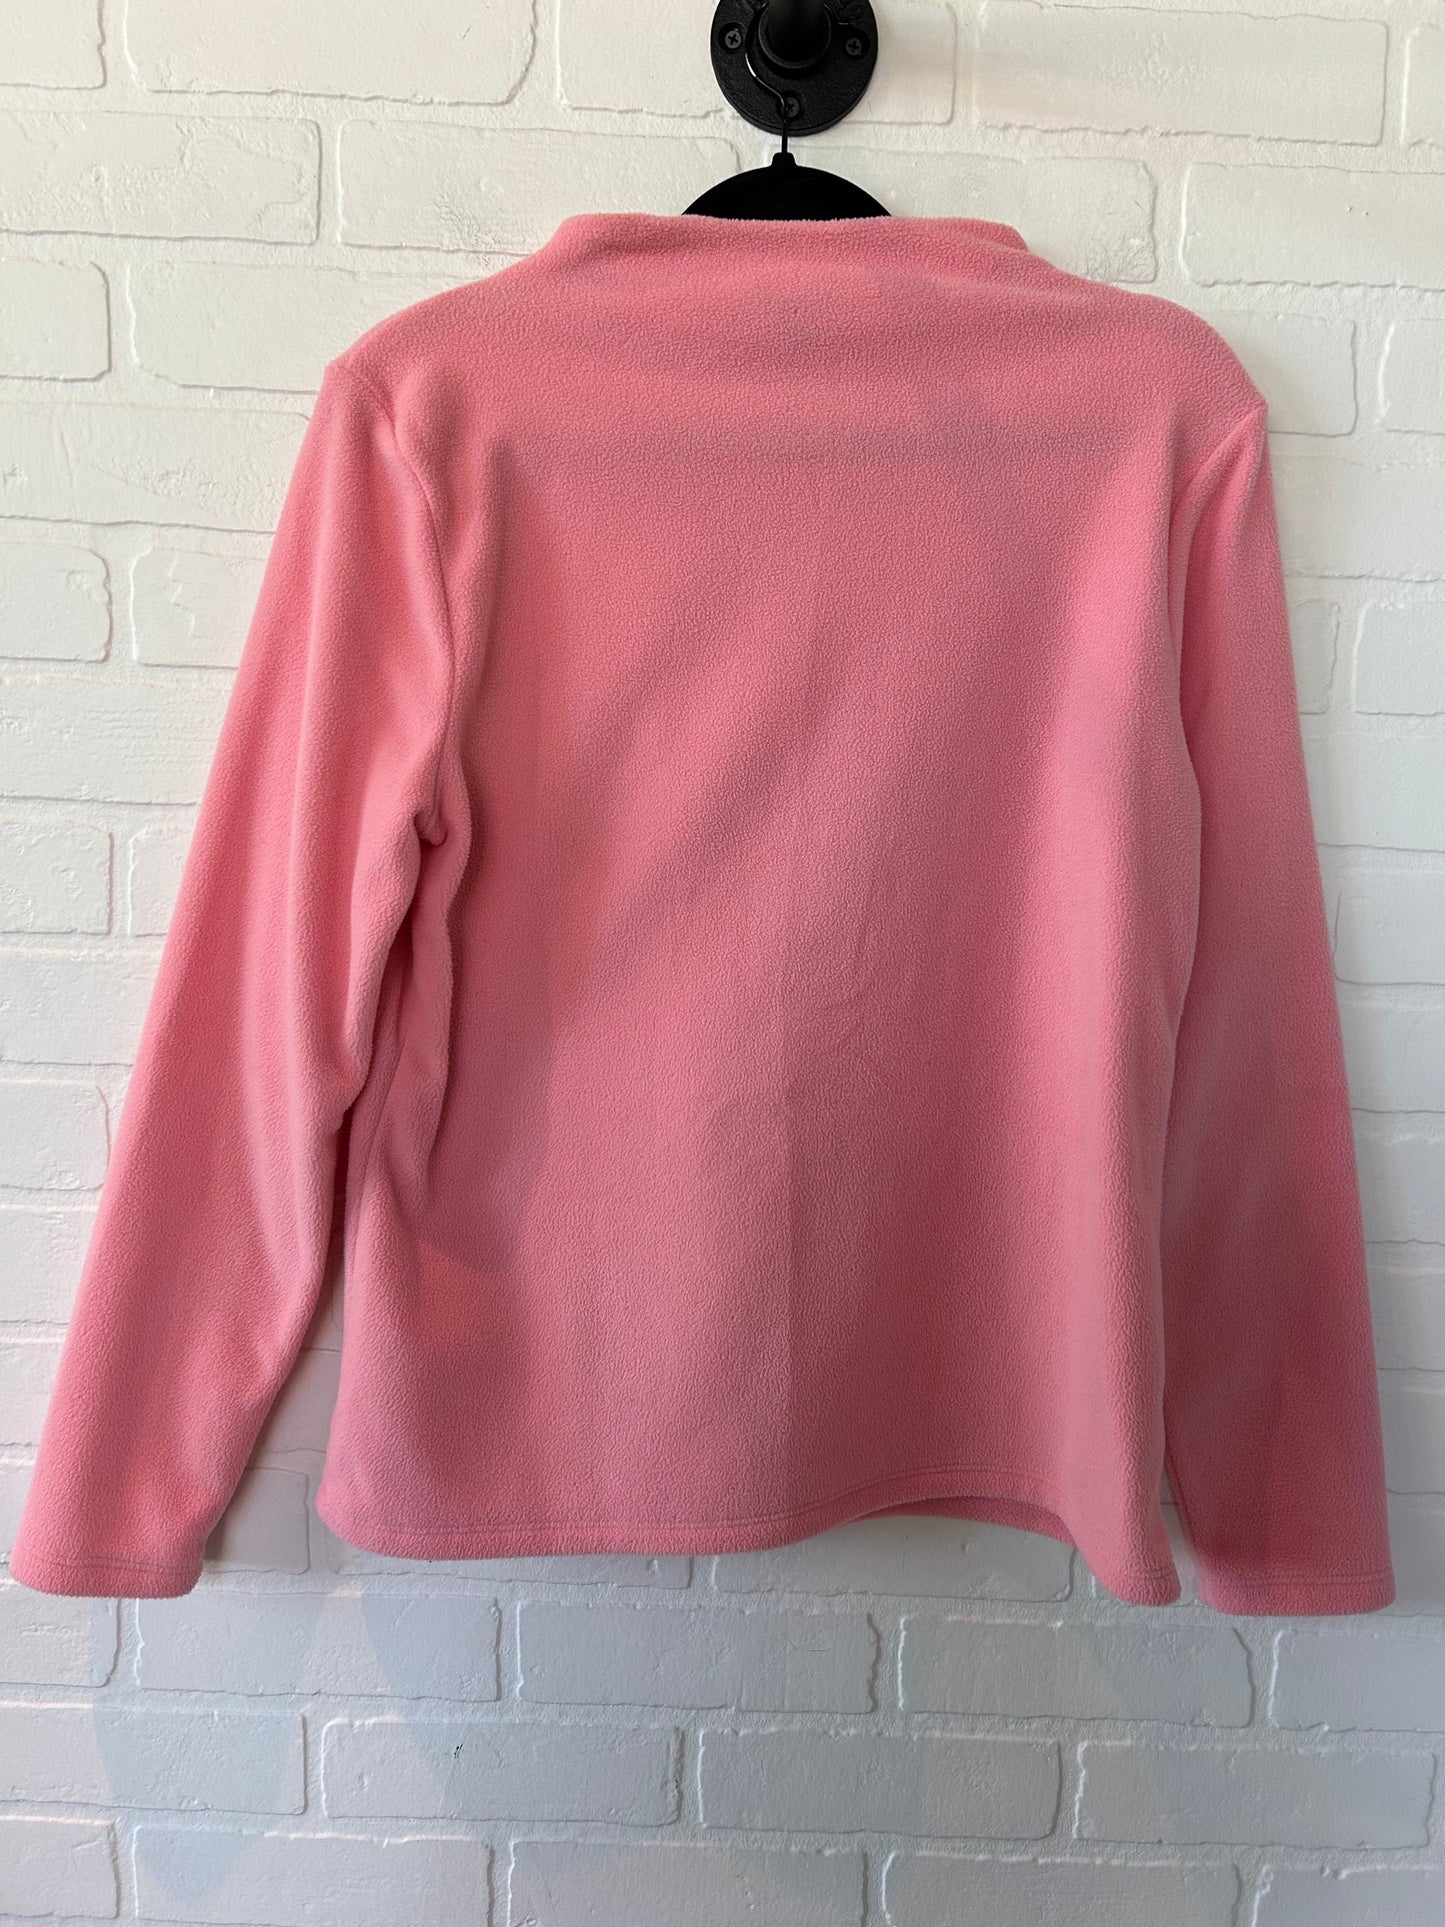 Pink Top Long Sleeve Fleece Pullover Talbots, Size M